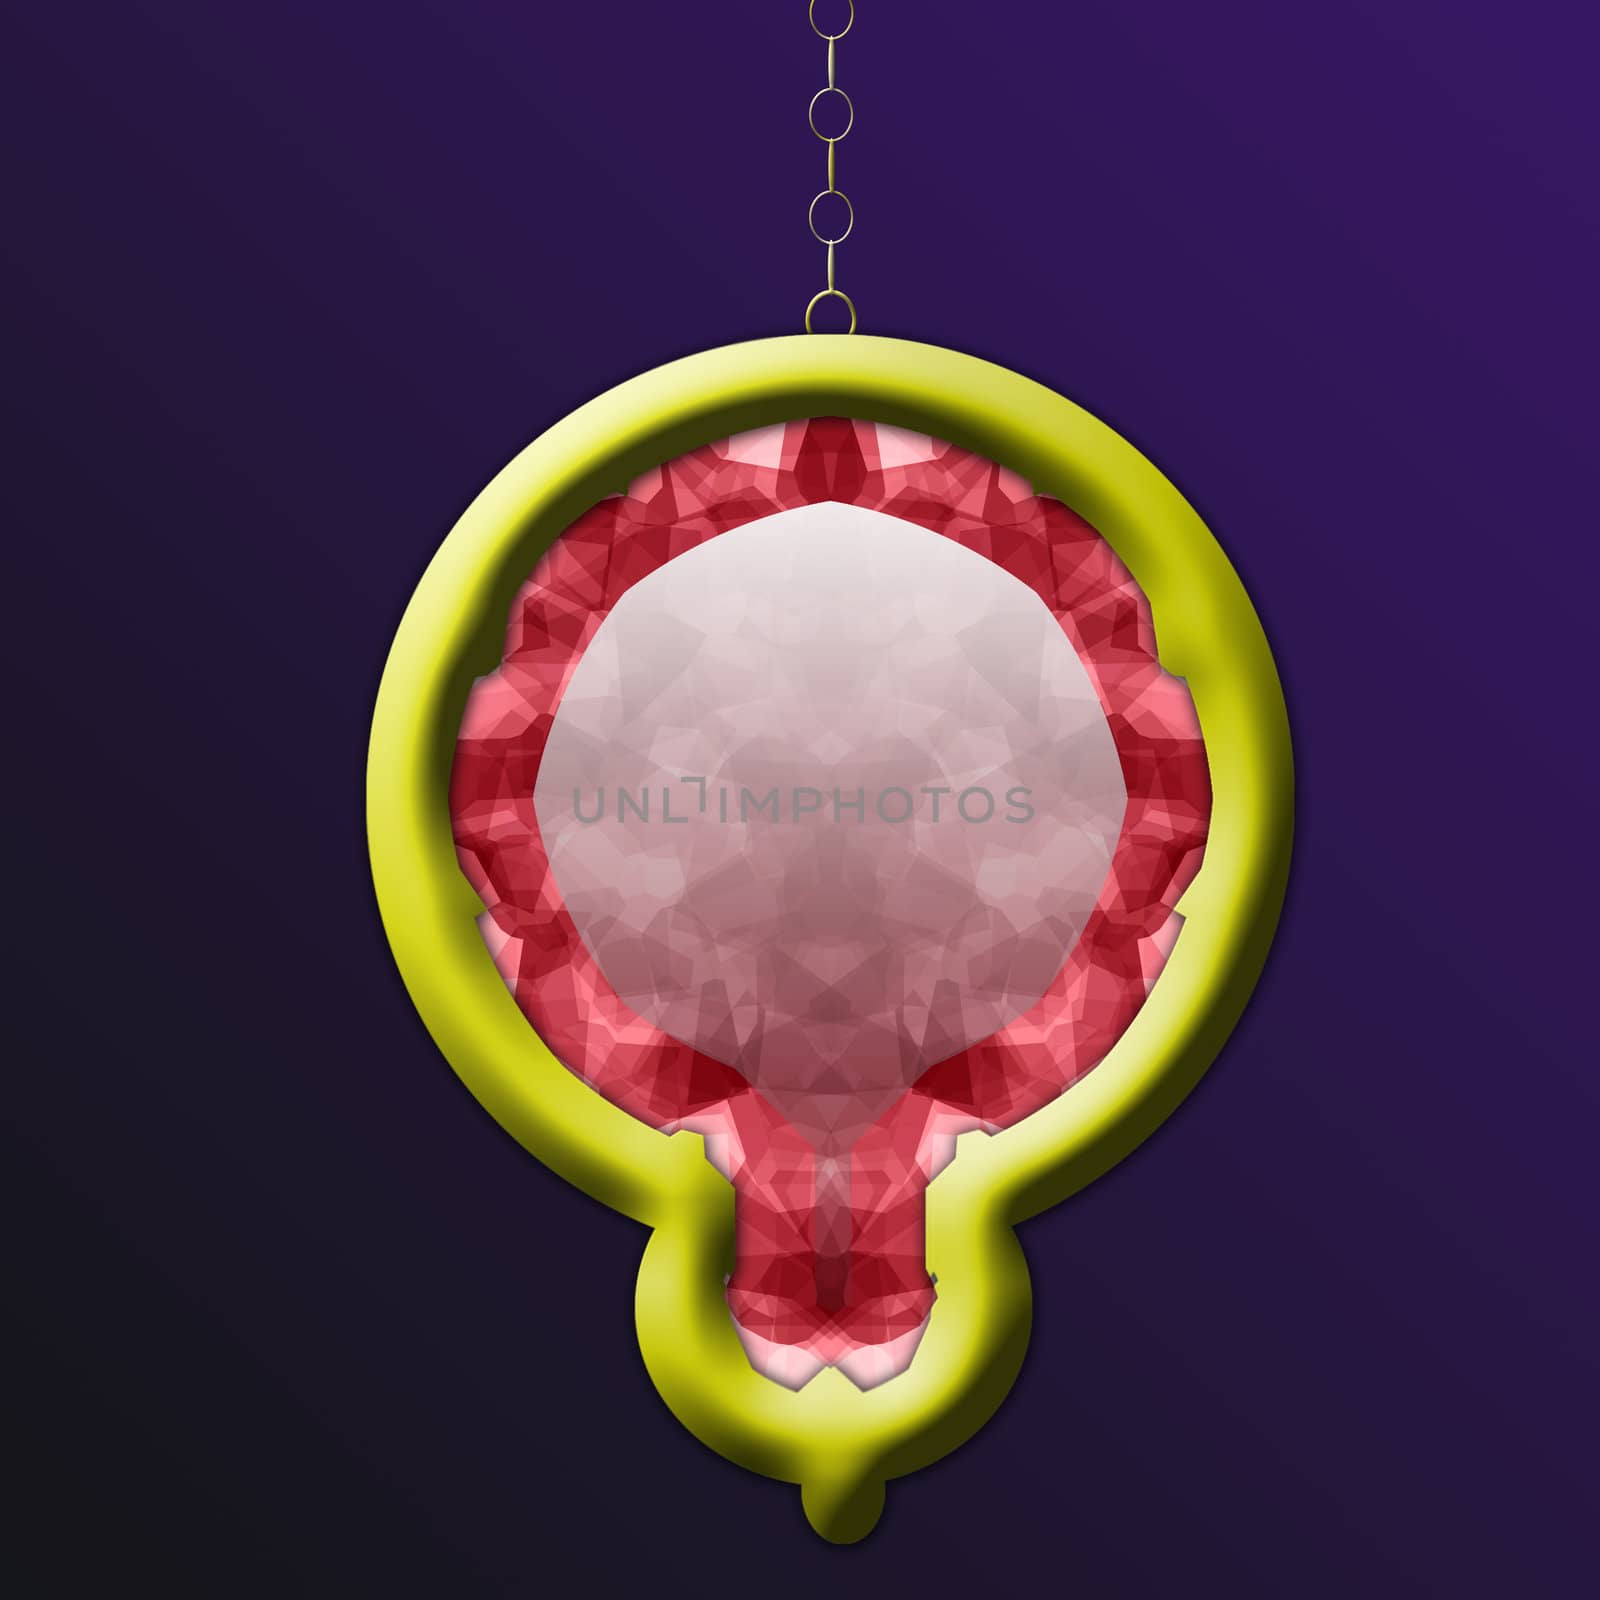 An illustration of a red ruby pendant hanging from a gold chain